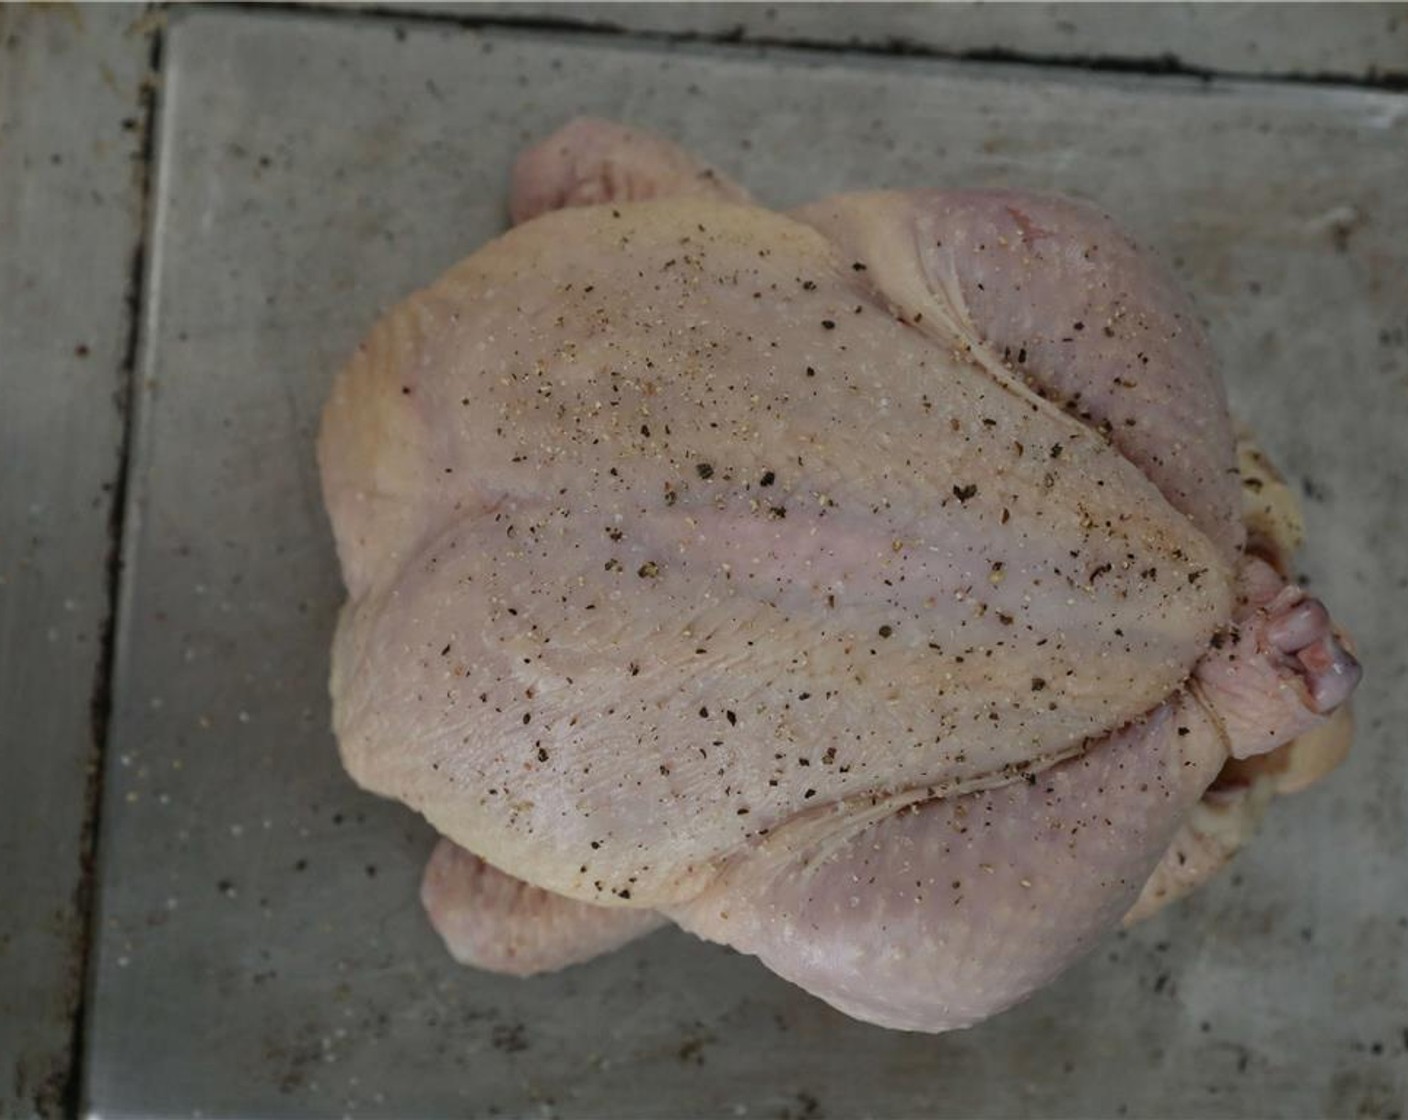 step 9 Flip the chicken back over breast-side up. Pull the wing tips back, so the chicken is ready to tan. Season with Salt (to taste) and Ground Black Pepper (to taste) on both sides. Place on a roasting pan, and roast in a 450 degrees F (230 degrees C) oven for 50 to 60 minutes, or until a thermometer inserted into the thigh reads 165 degrees F.